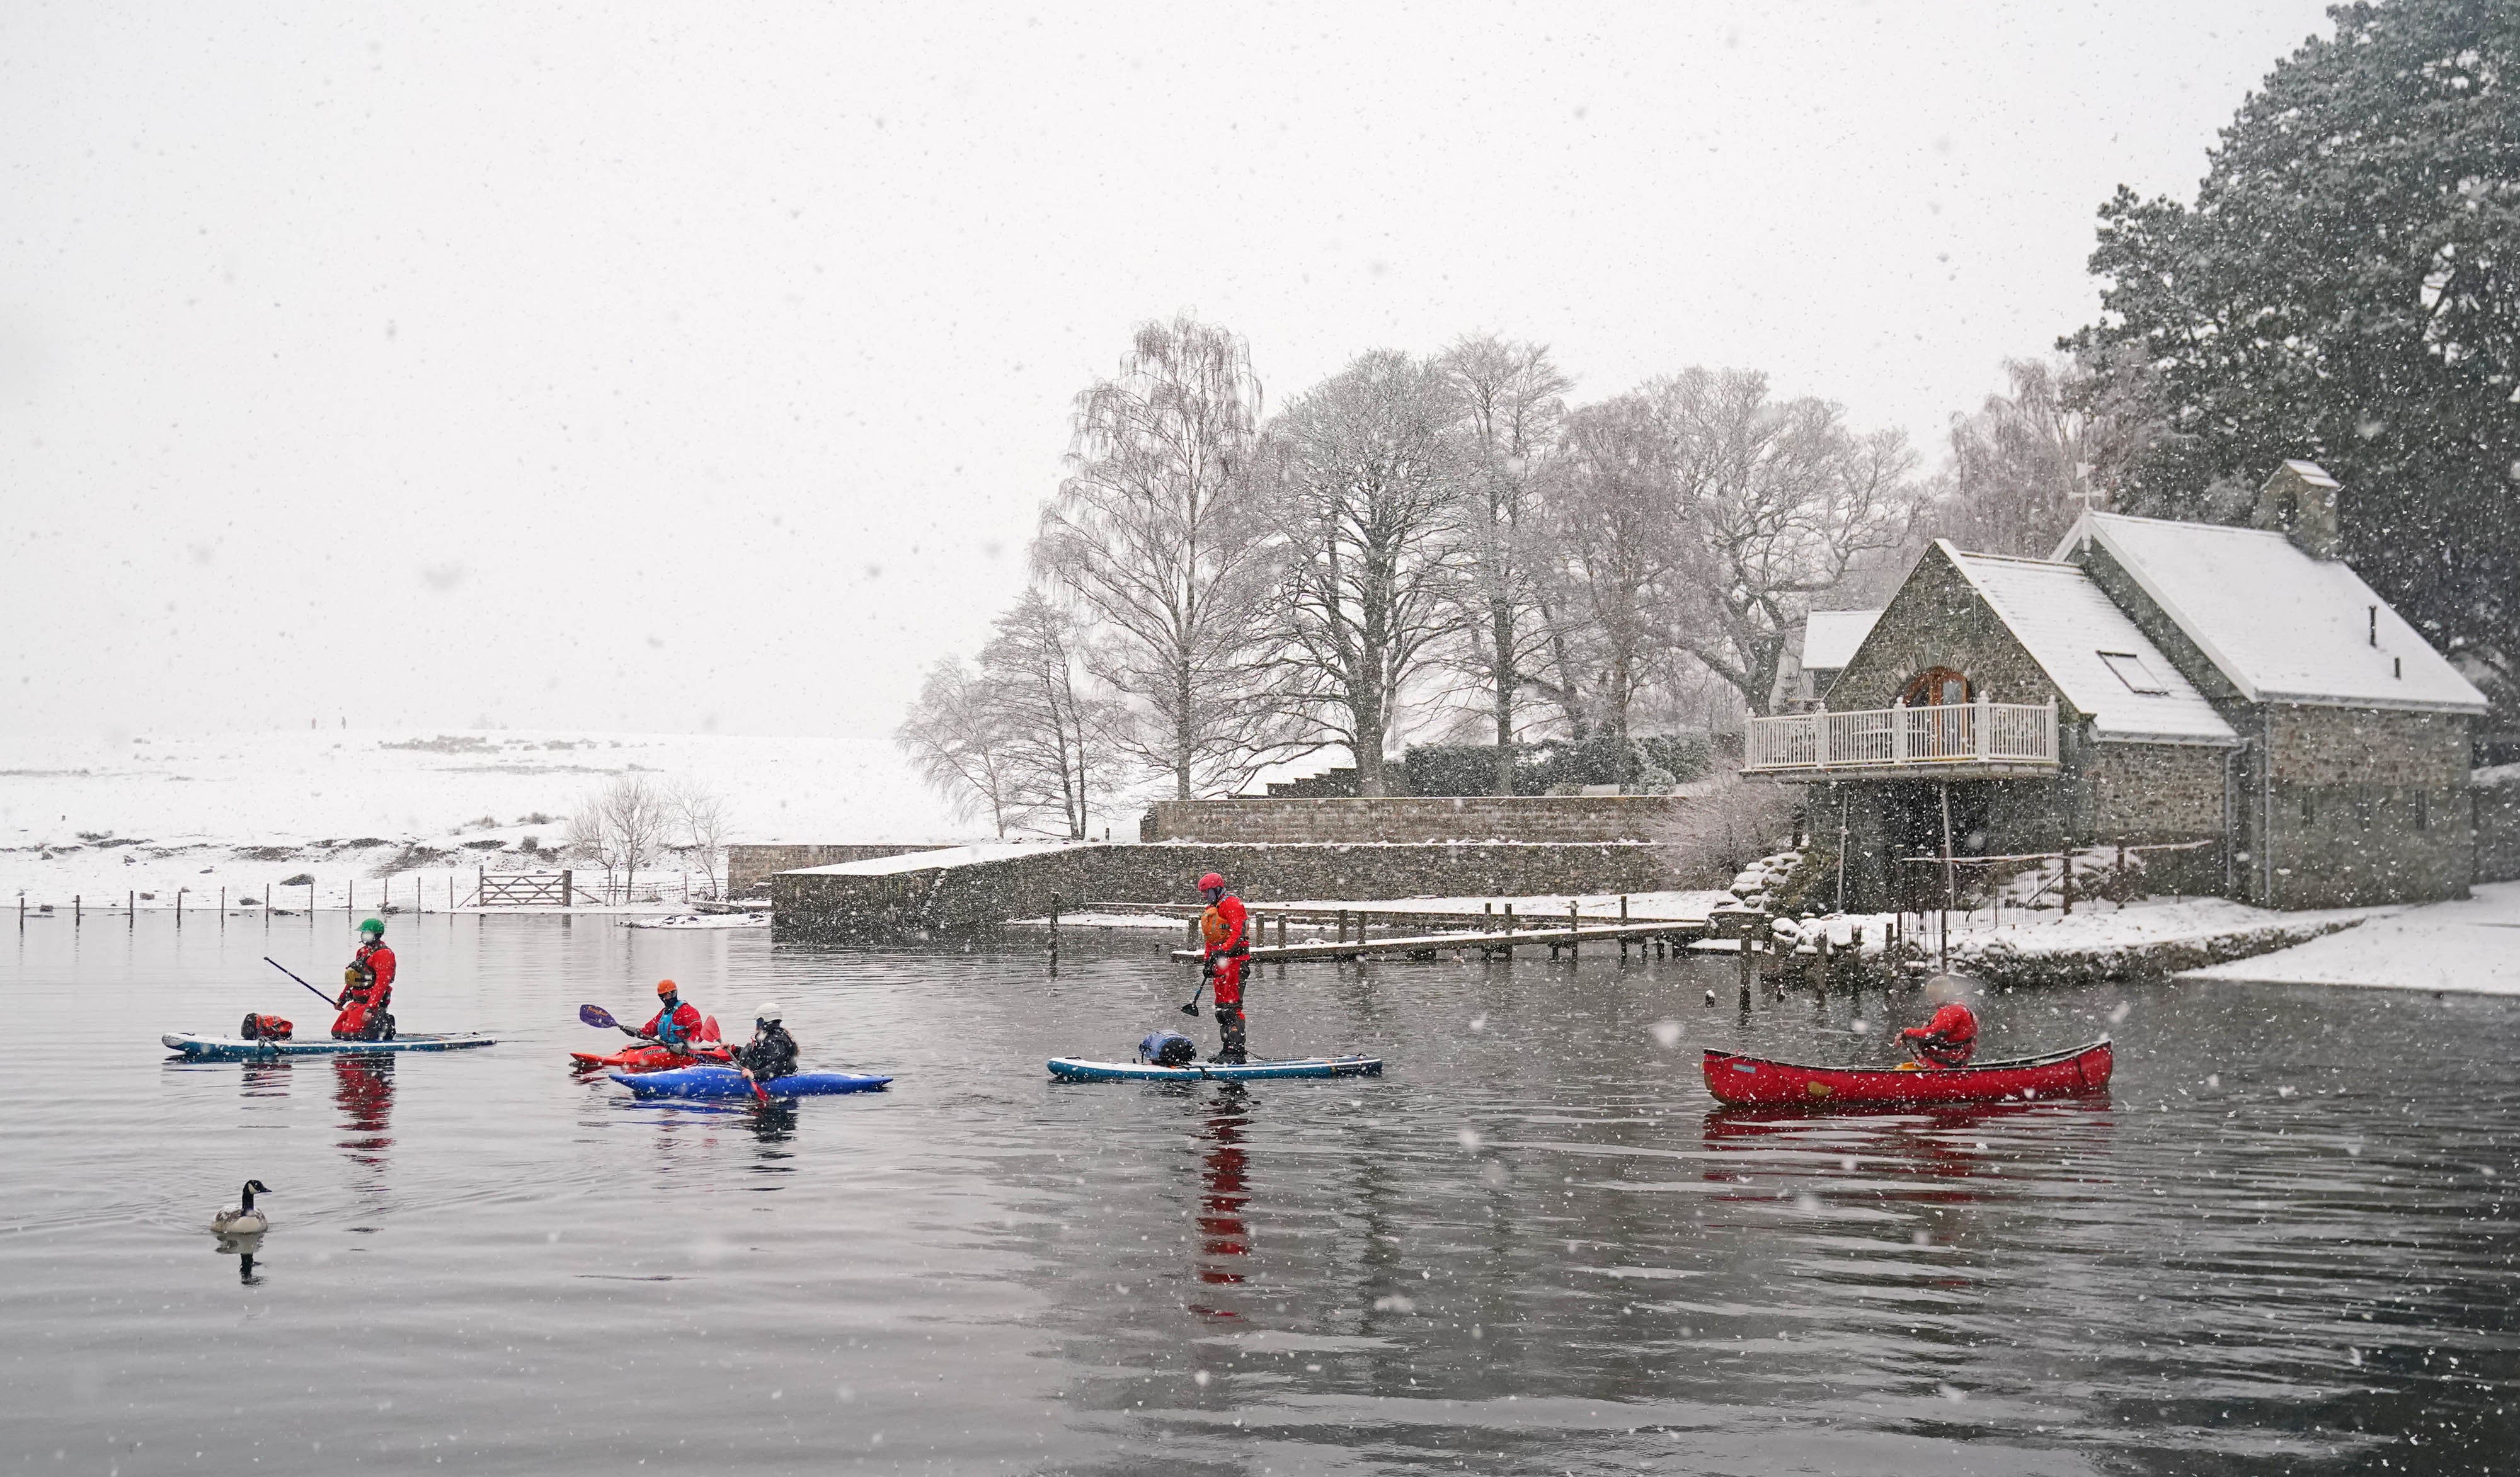 Canoeists, kayakers and paddleboarders in snowy conditions on Derwent Water, Keswick in Cumbria